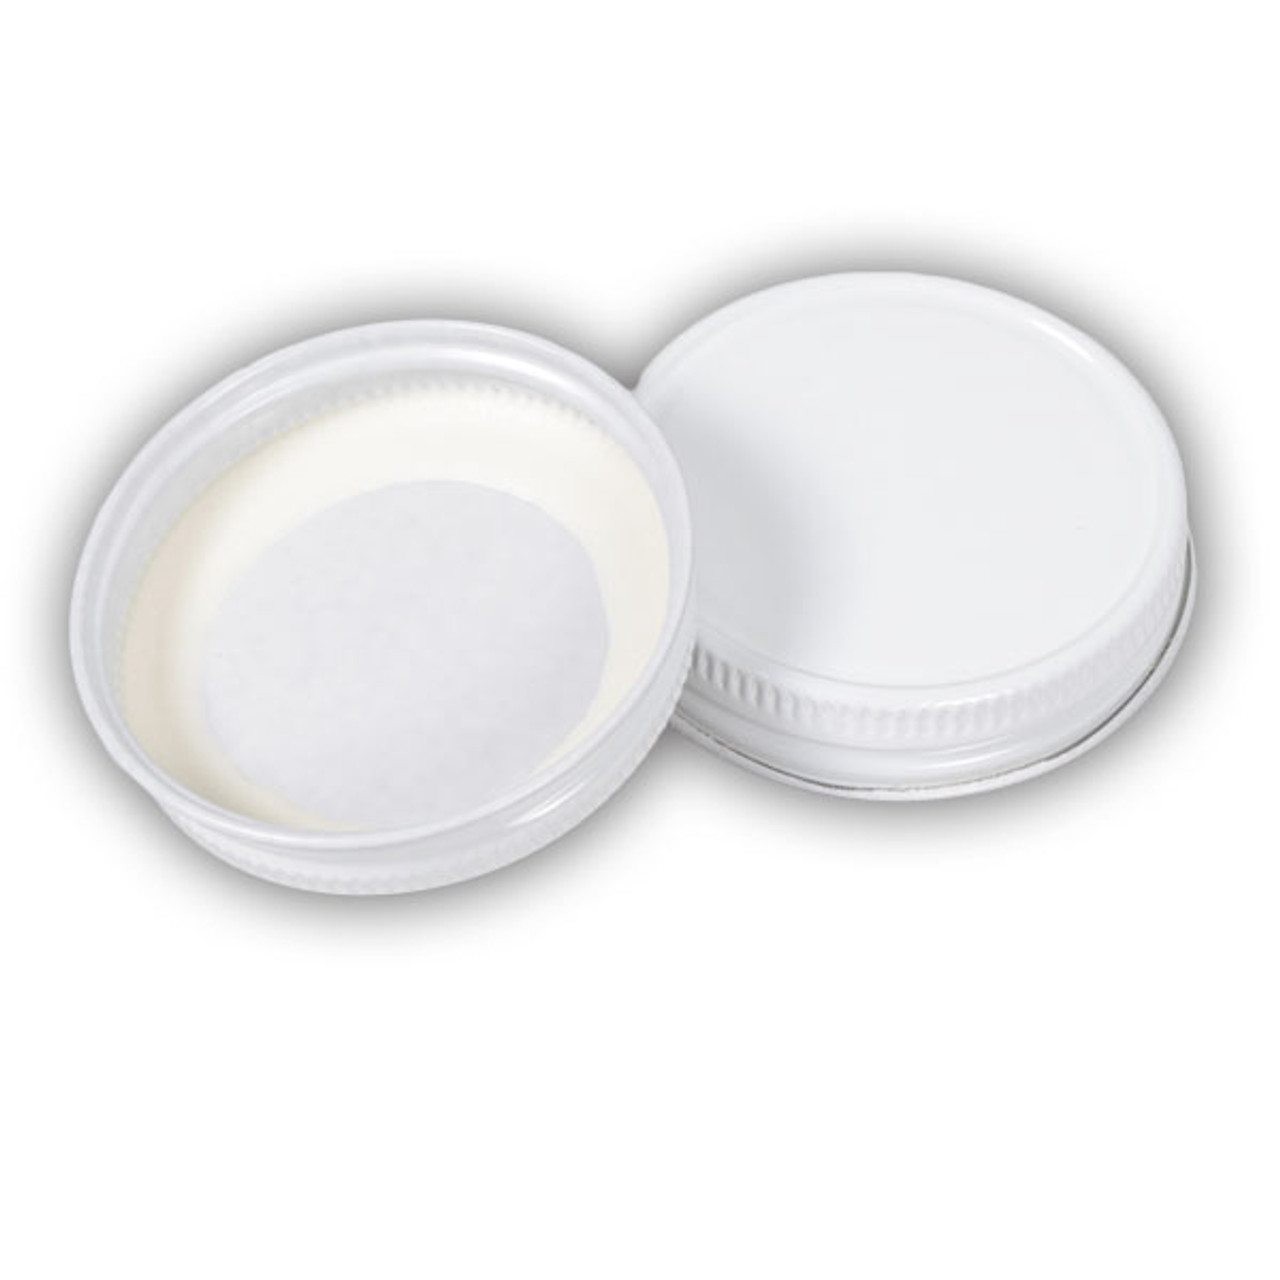 https://cdn11.bigcommerce.com/s-fx4fw18j2i/images/stencil/1280x1280/products/126/388/48MM_WHITE_Metal_Lids_for_8_oz._and_1_lb._Glass_Classic__17596__00814.1629355755.jpg?c=1?imbypass=on